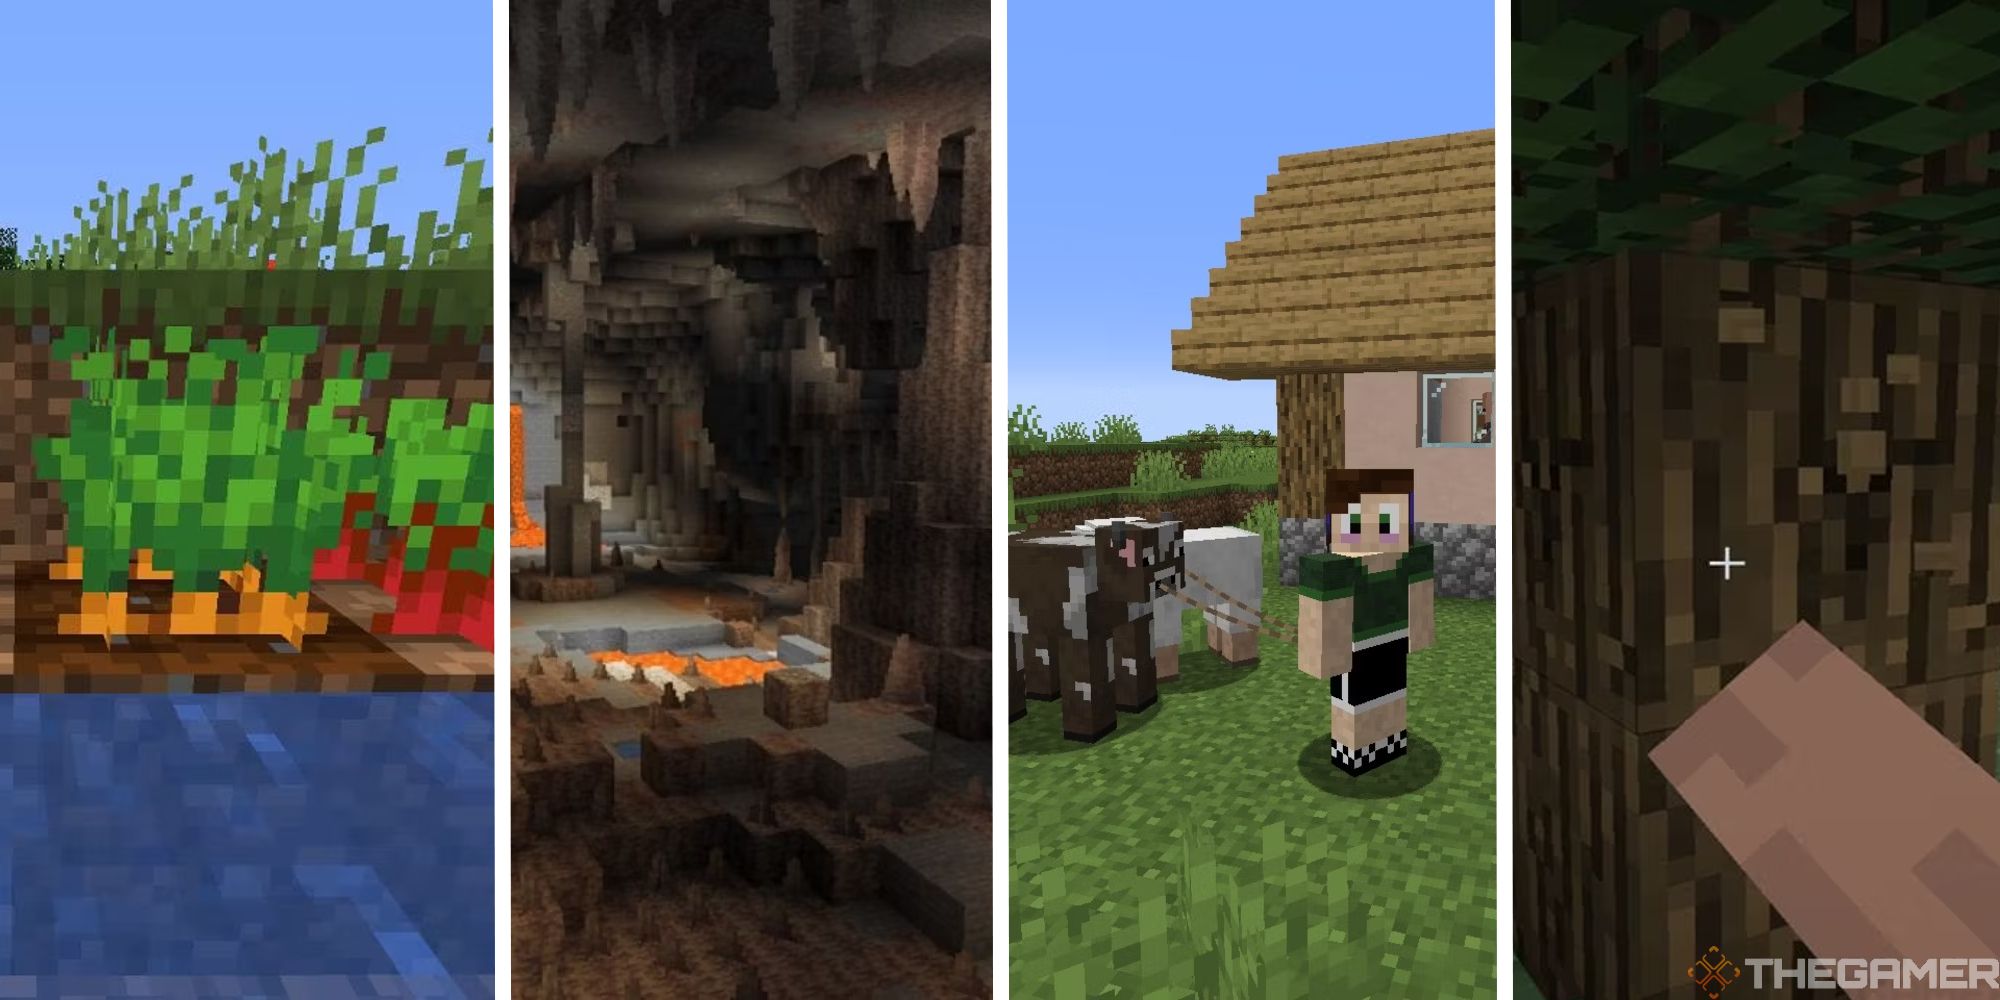 Things Beginners Should Do First When Starting Minecraft